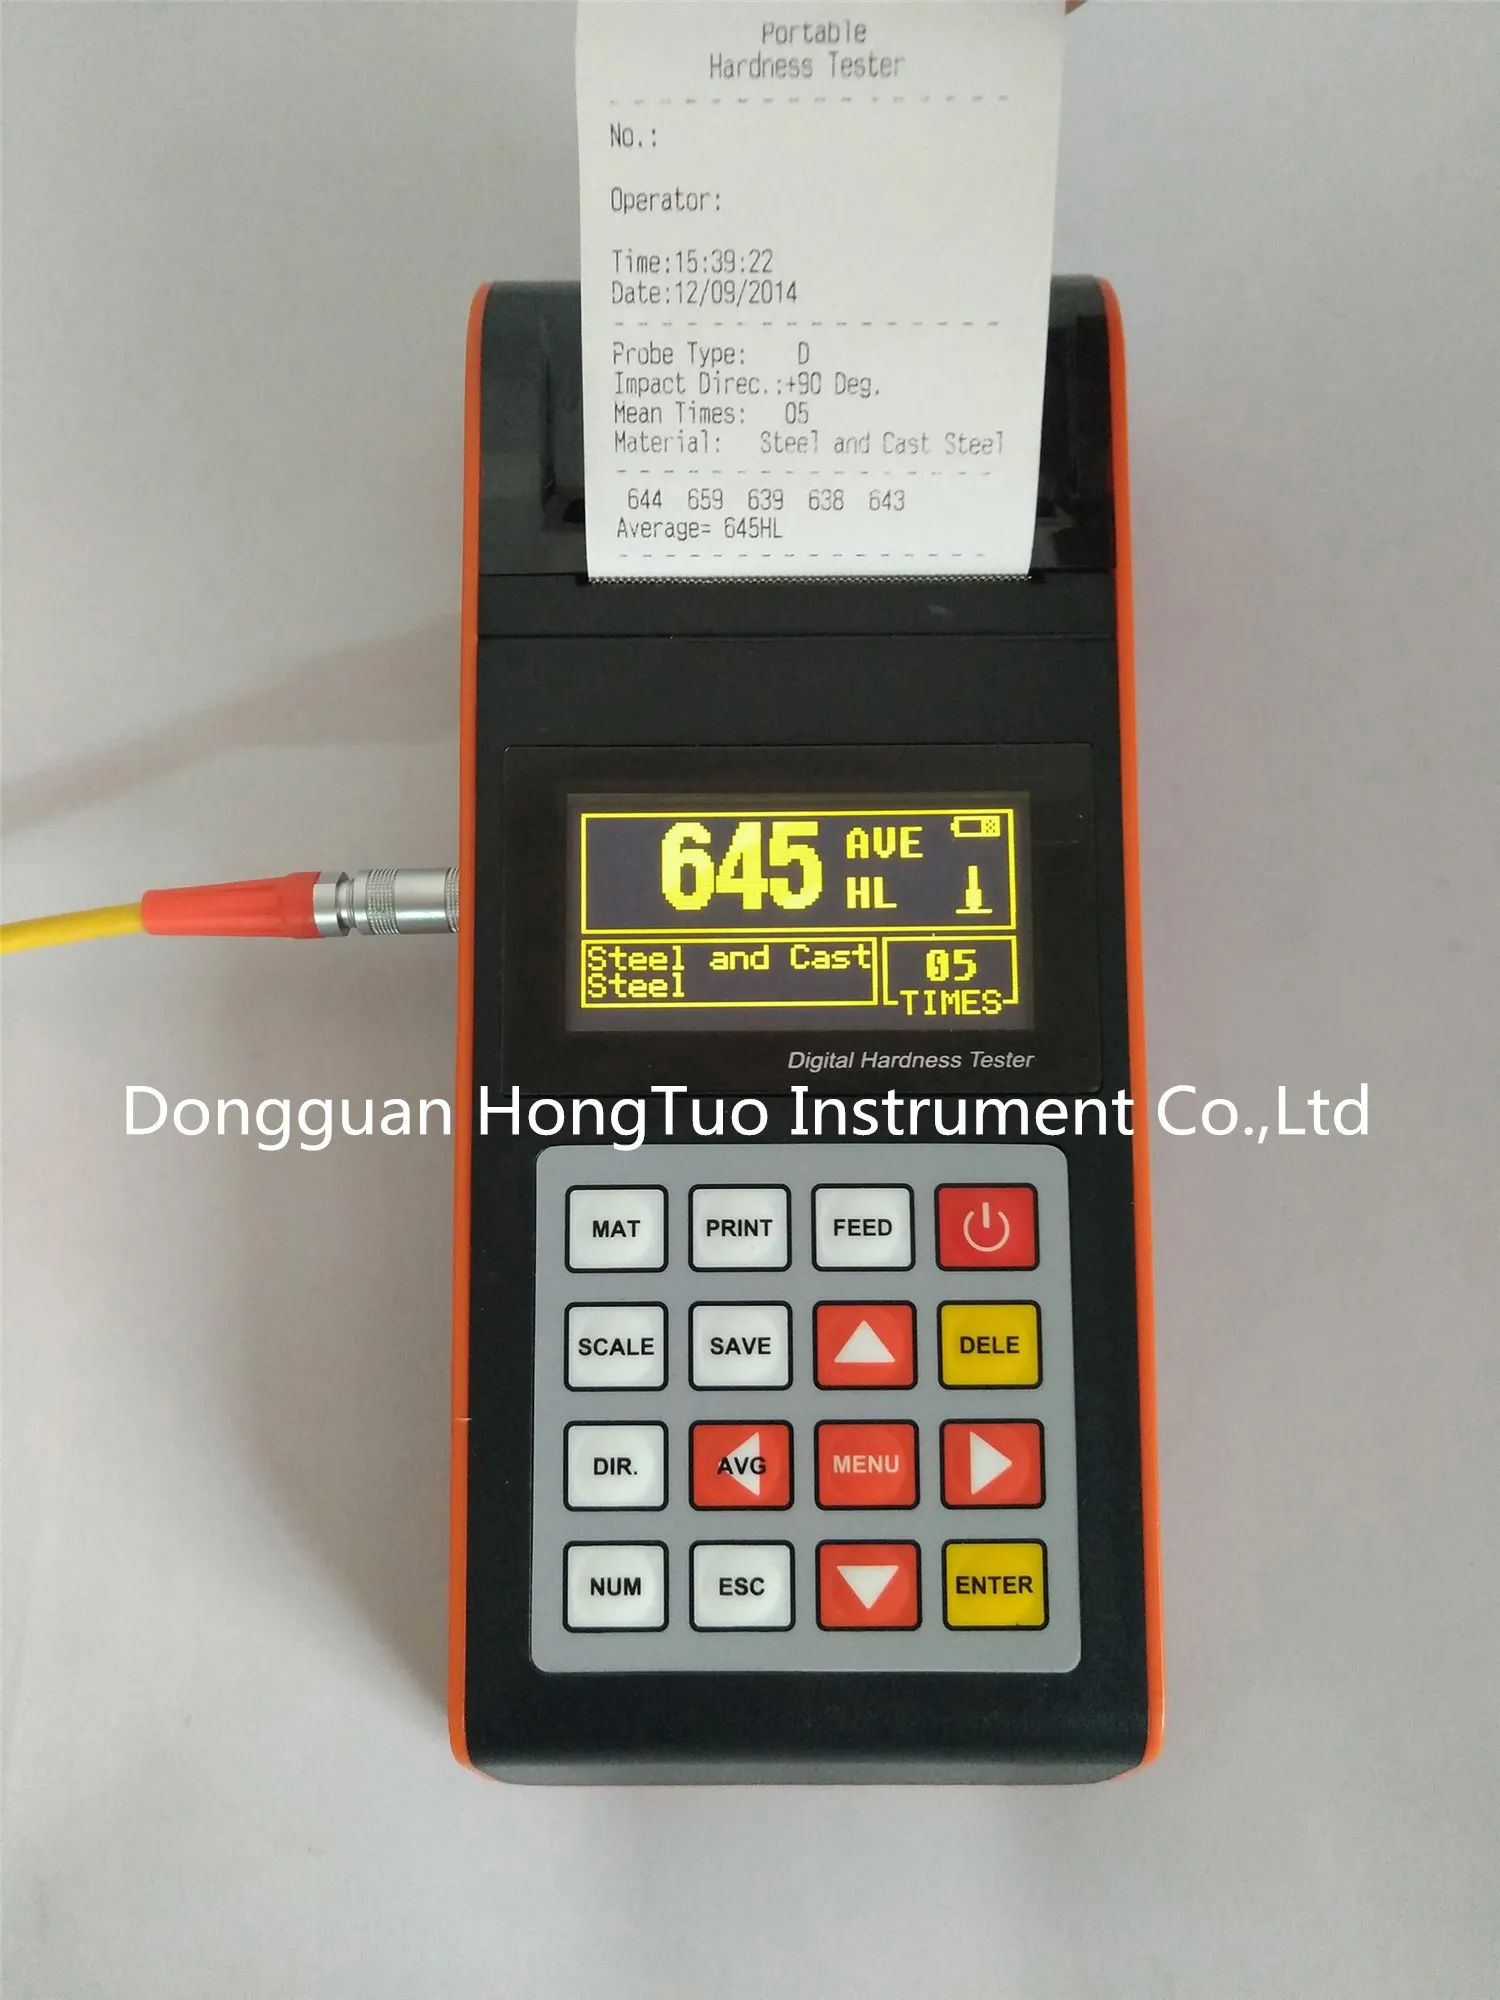 KH520 NDT Hardness Testers,Portable Hardness Tester From China Manufacturer